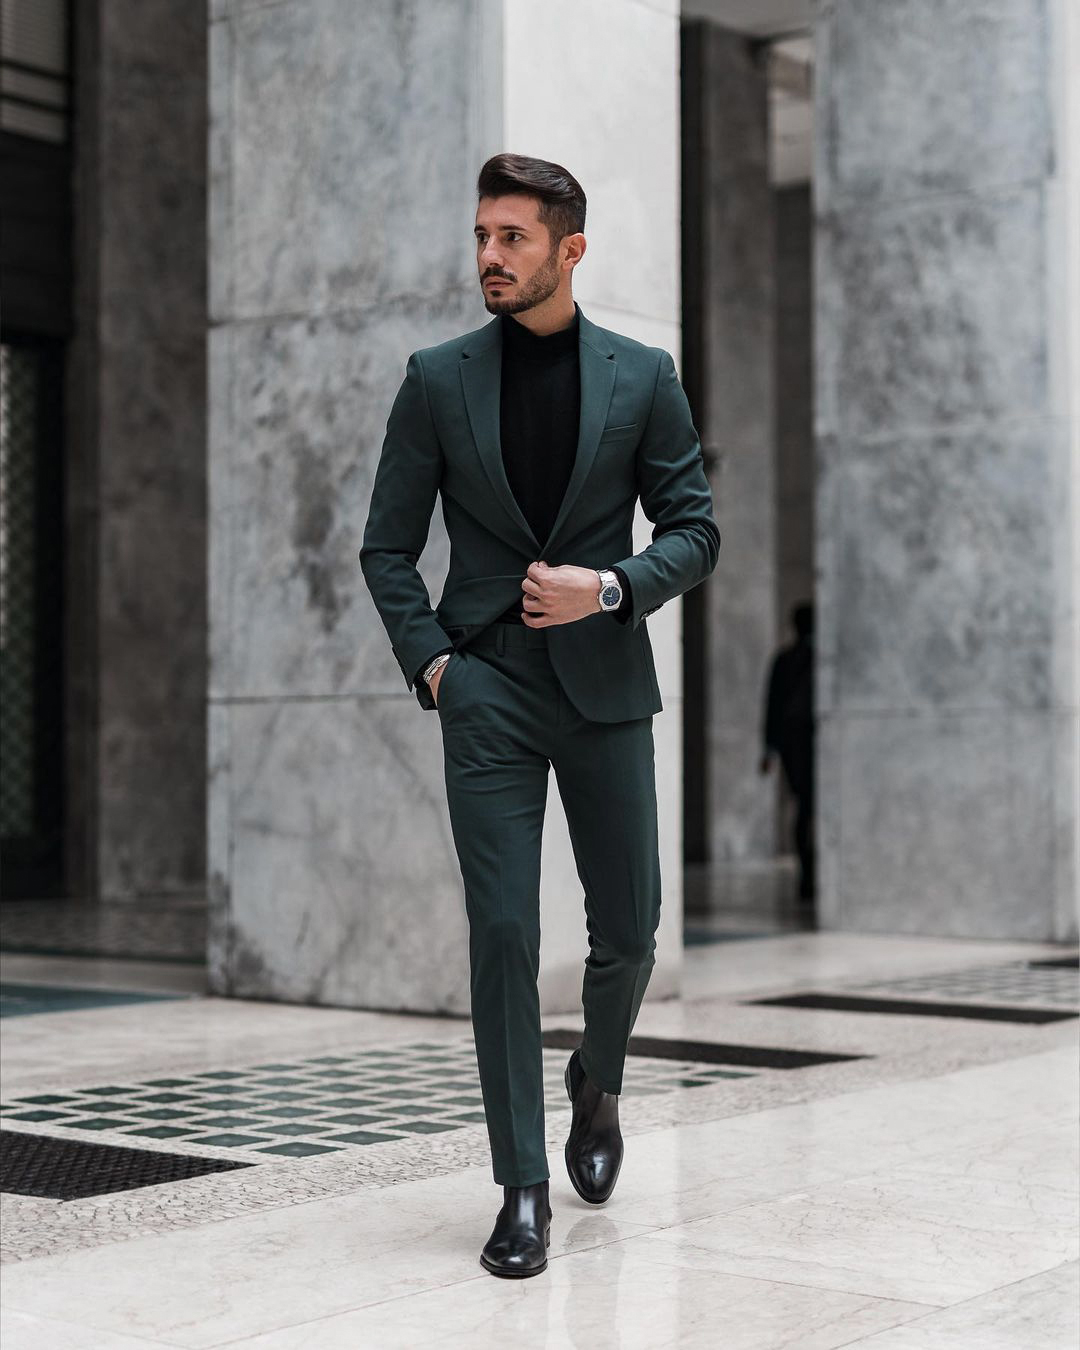 15 Suit Color Choices & How to Pick the Right One - Suits Expert